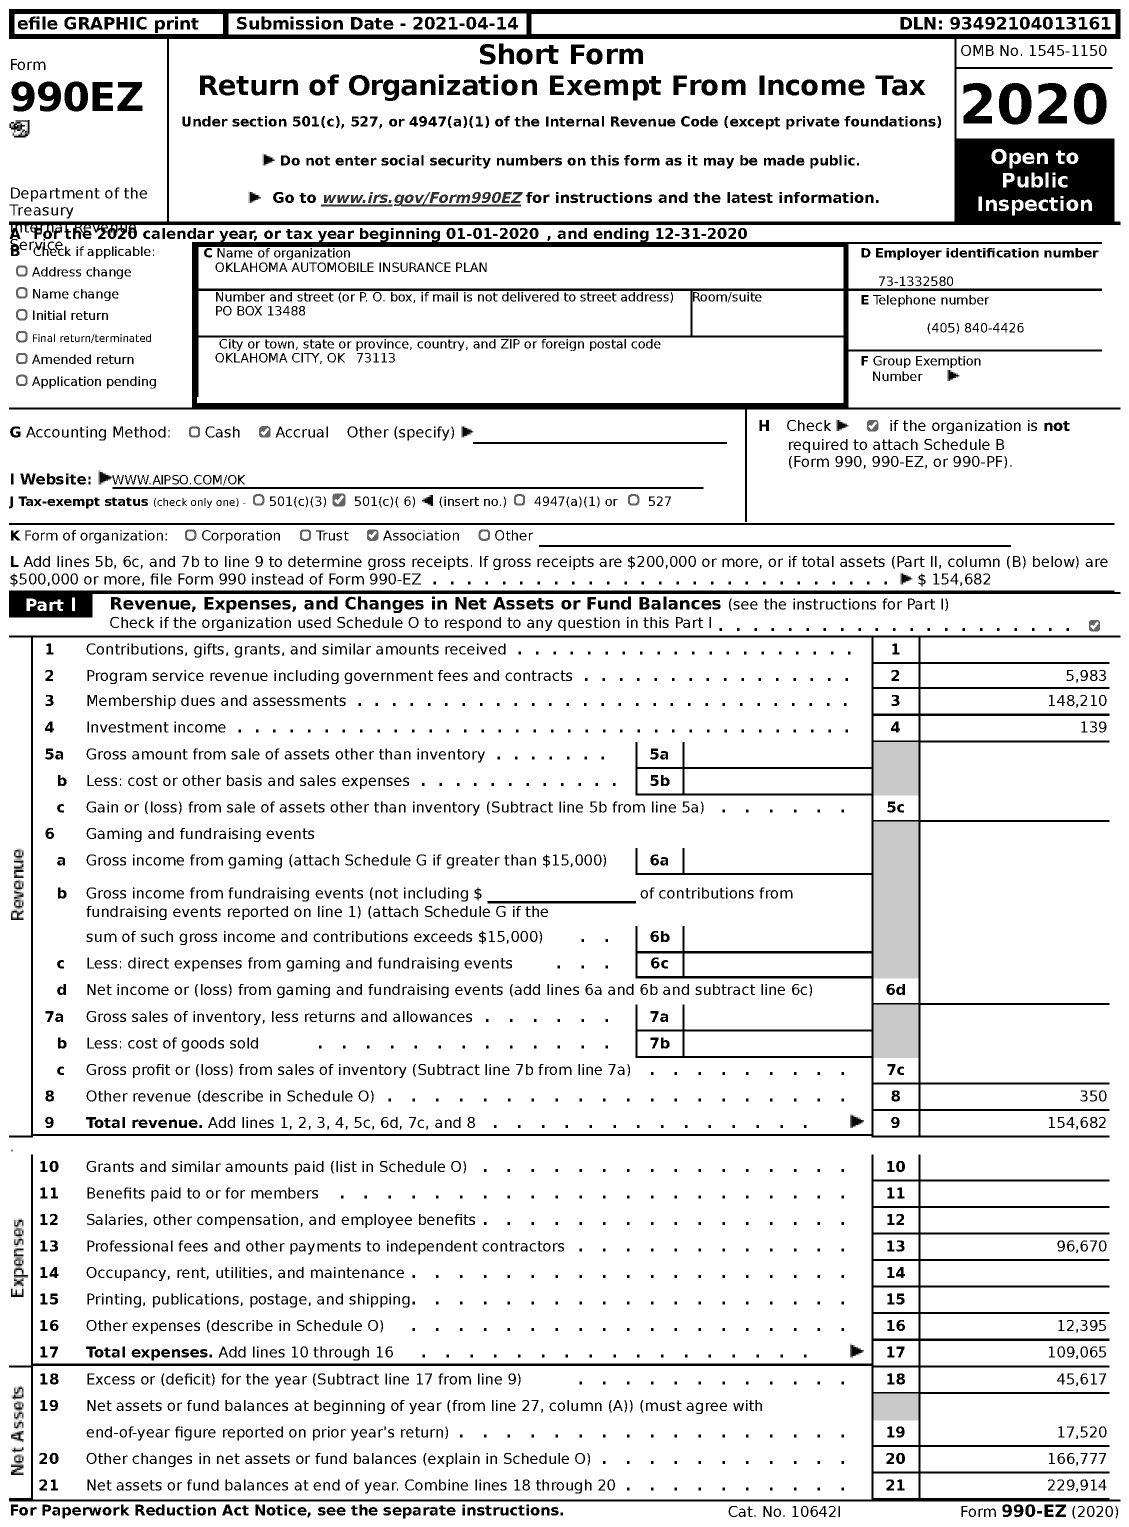 Image of first page of 2020 Form 990EZ for Oklahoma Automobile Insurance Plan